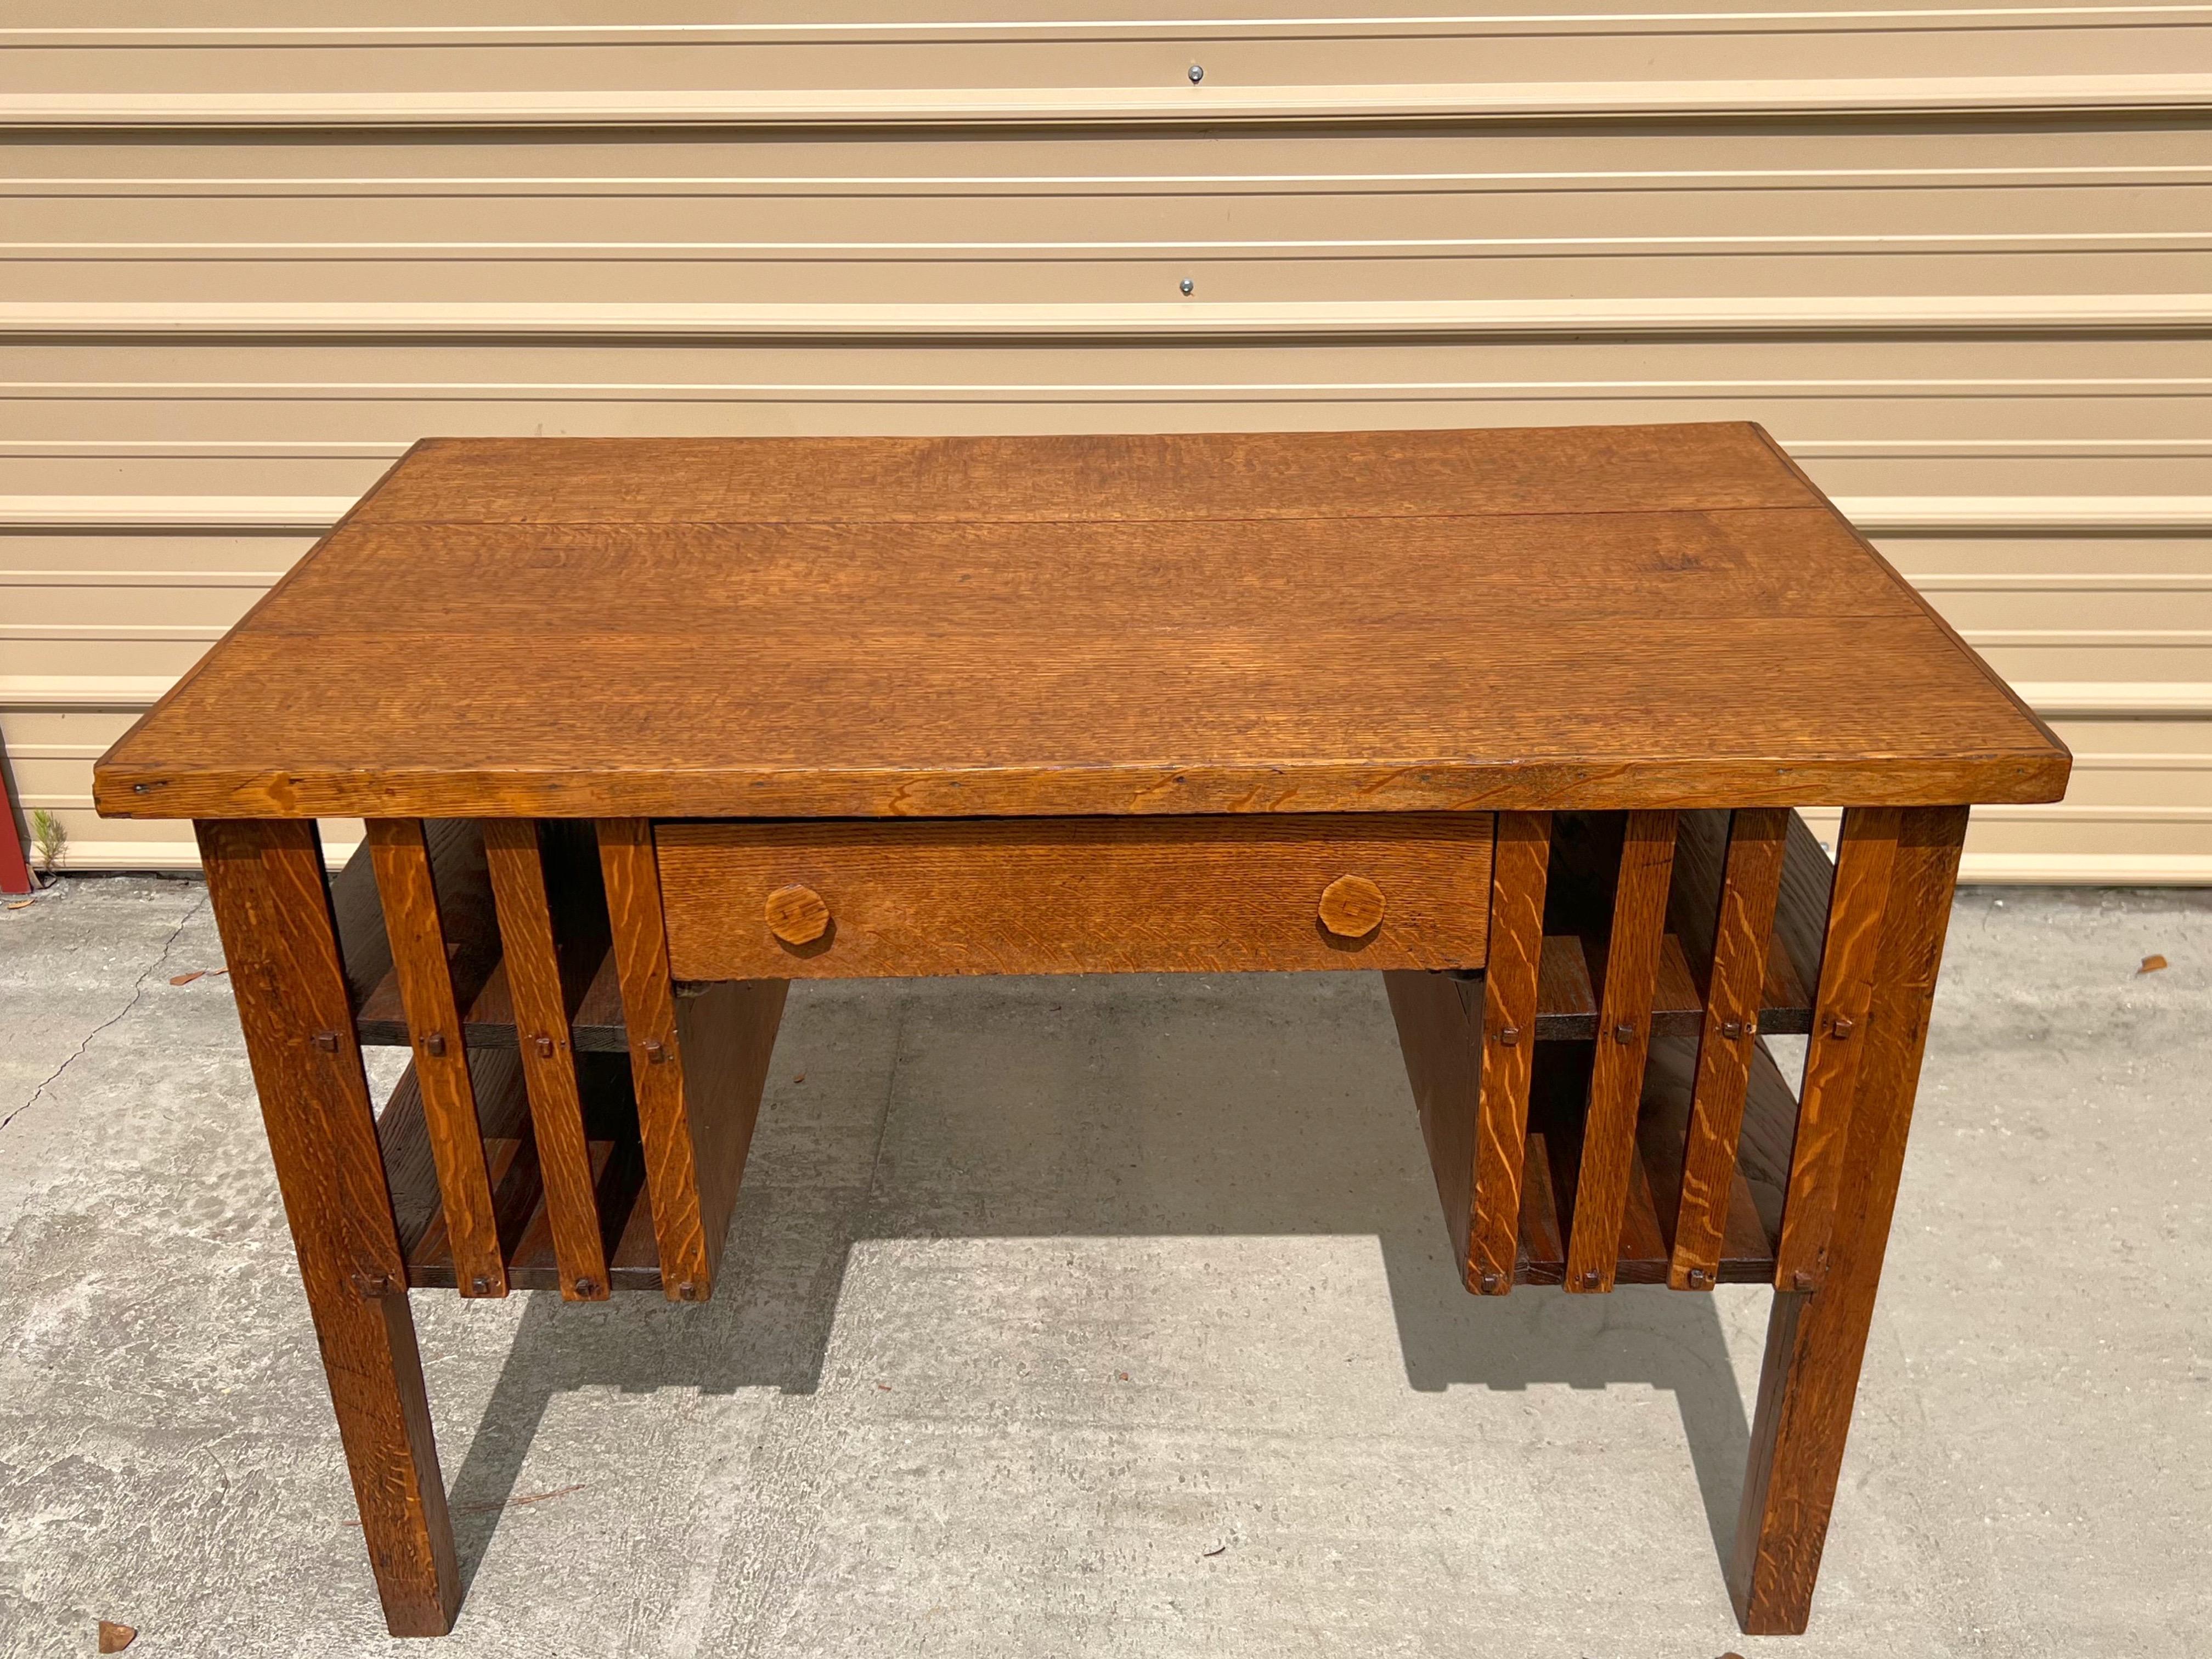 Early 1900s Arts & Crafts Fully Restored Oak Mission Desk

19th Century arts & crafts quarter-sawn oak mission desk that has been fully restored and beautifully refinished. A truly gorgeous antique piece. This desk is beautifully crafted with clean